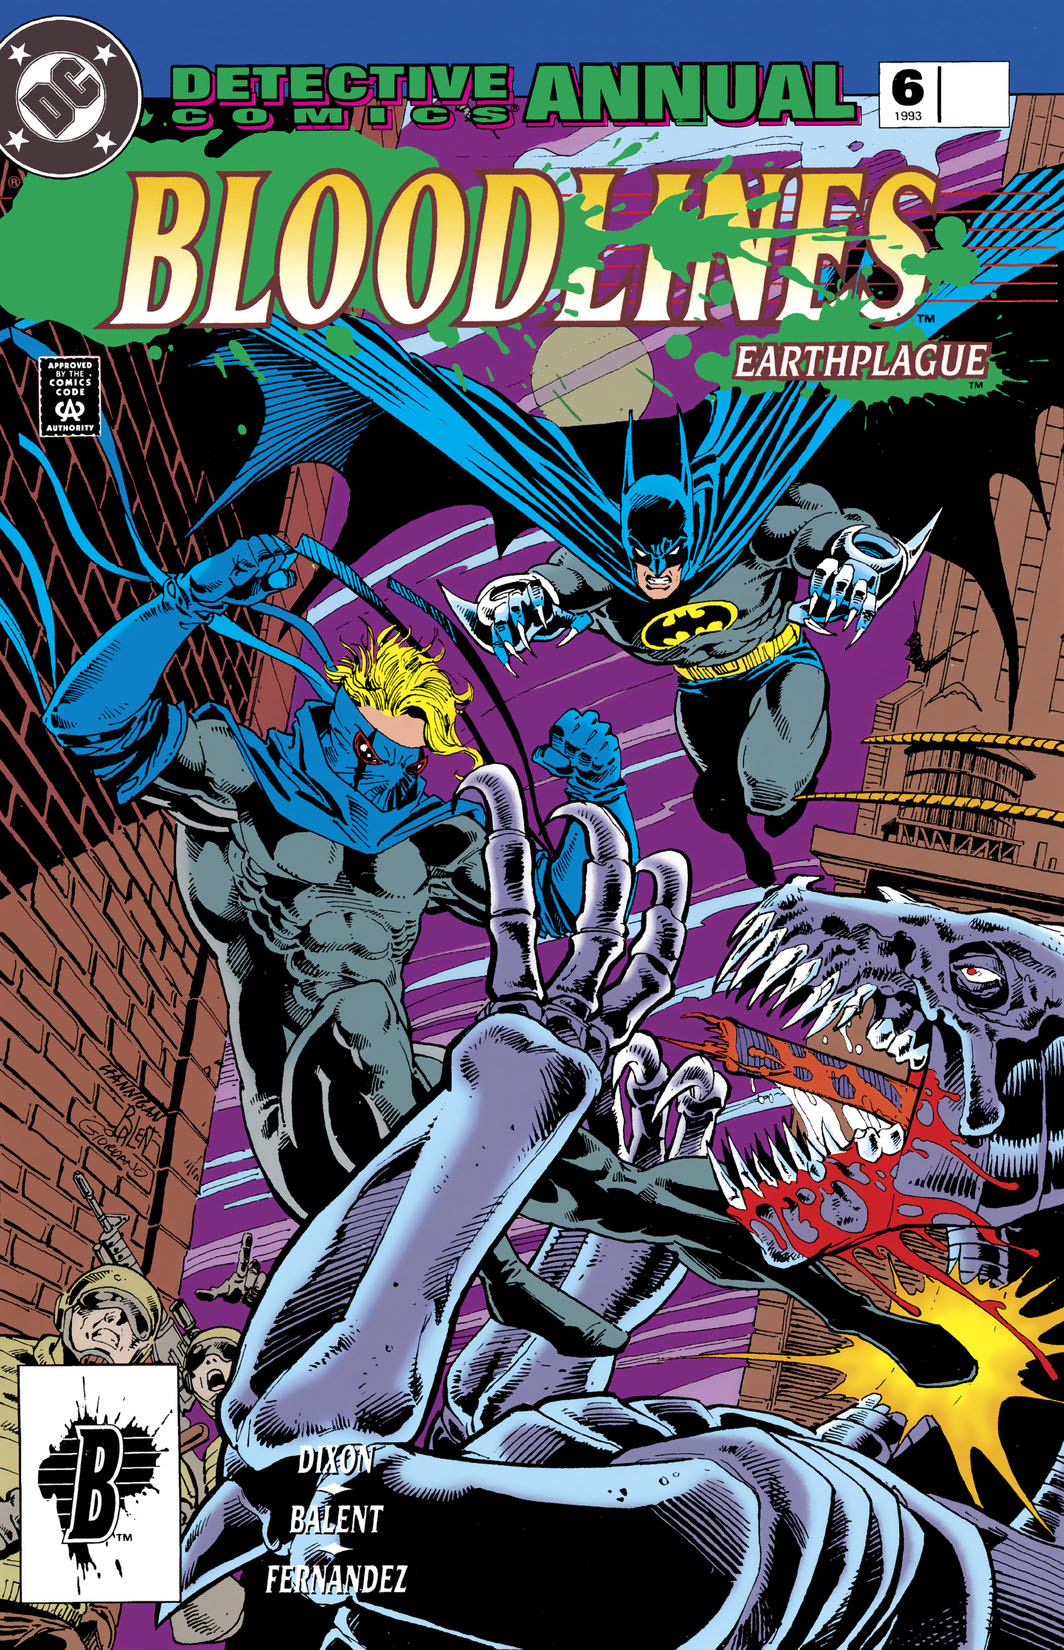 Detective Comics Annual (1988-) #6 preview images